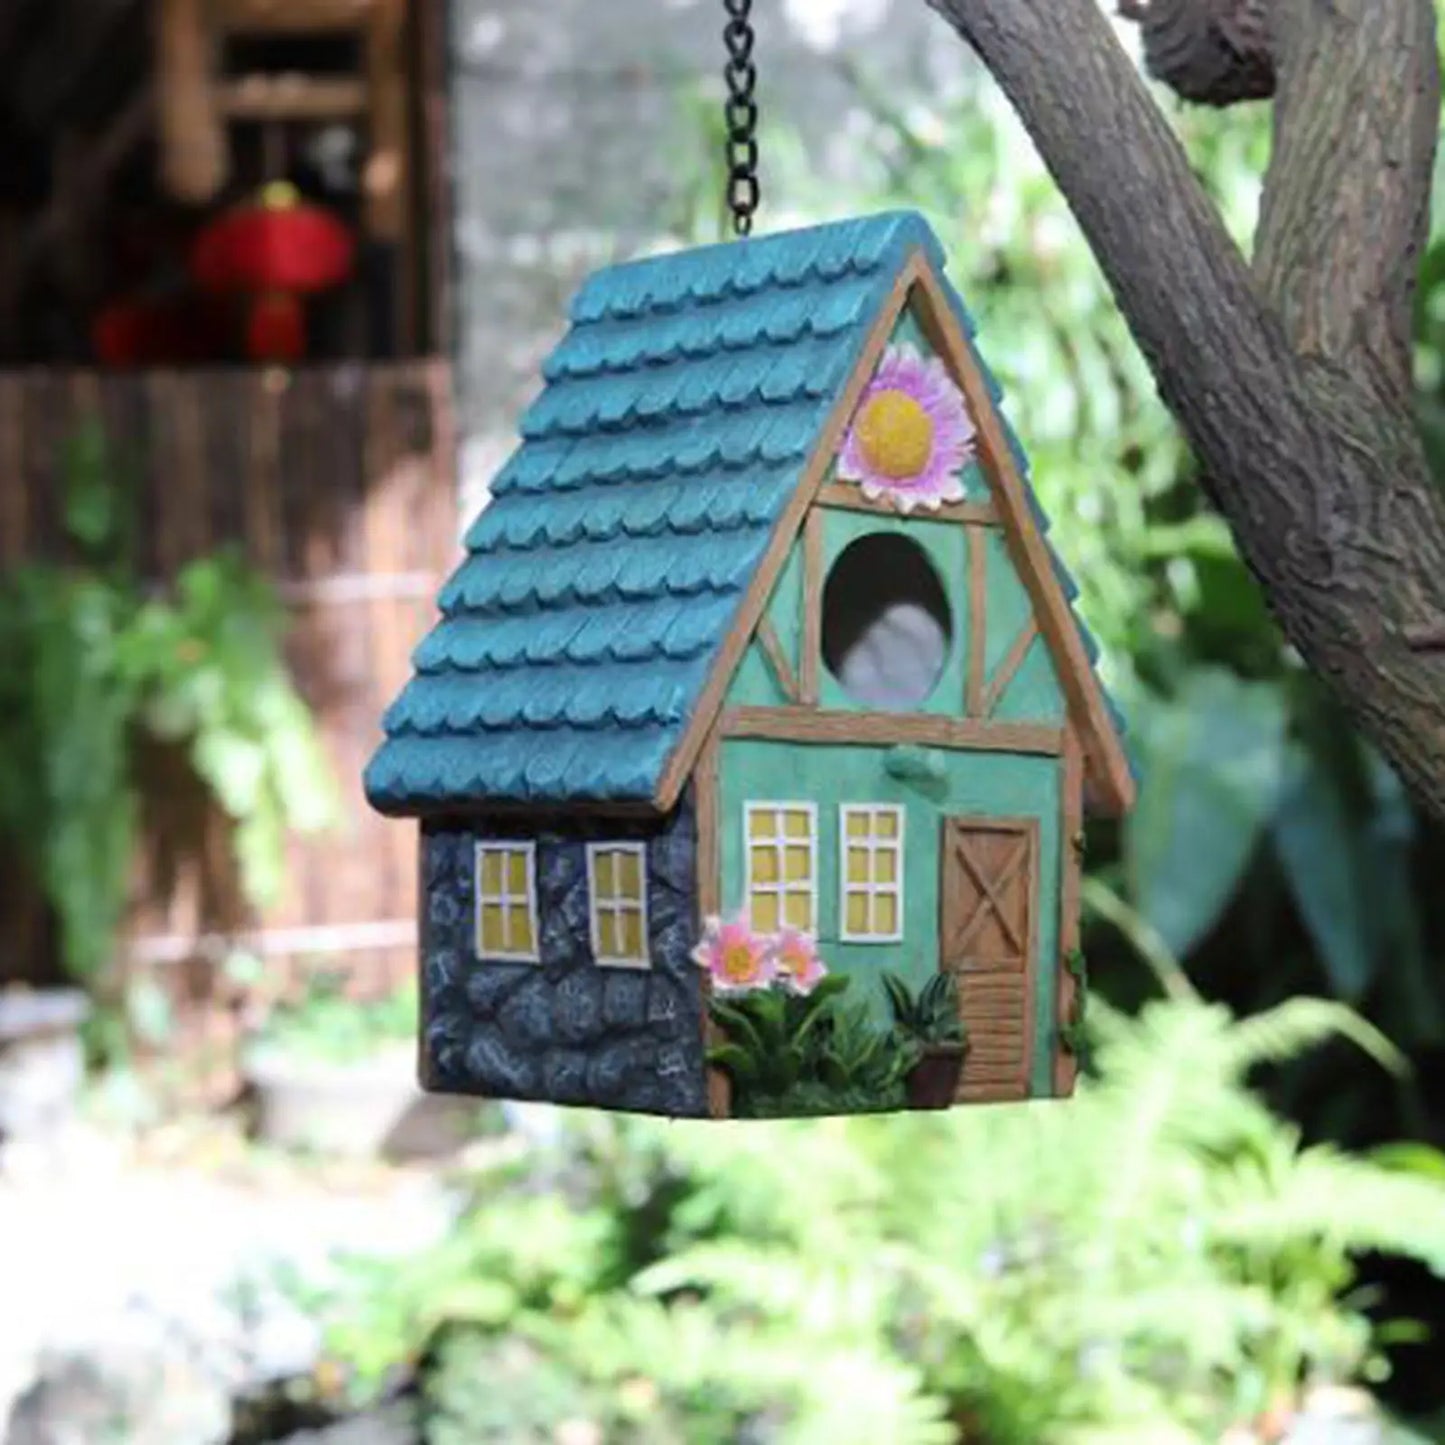 Hand-Painted Colorful Birdhouse